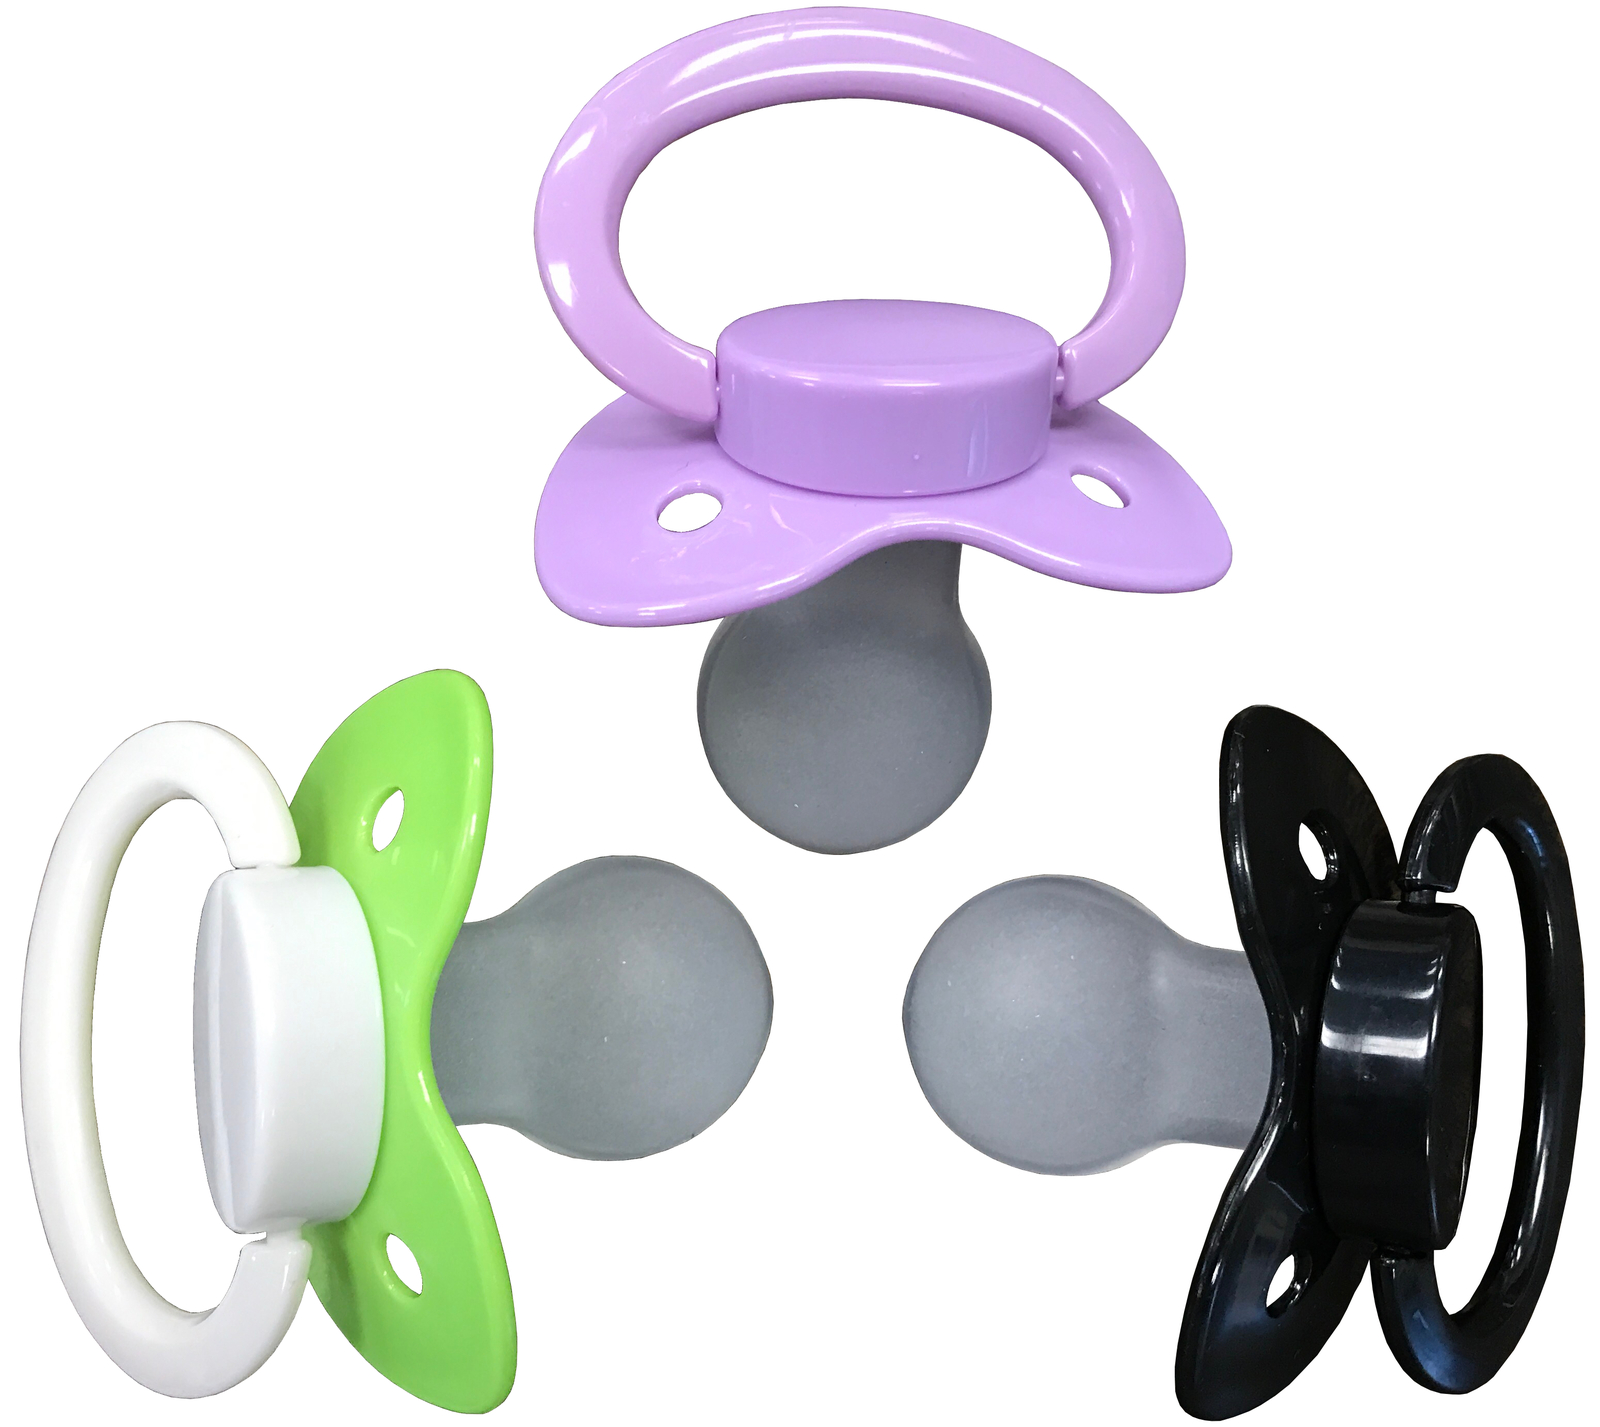 Adult Sized Pacifier Dummy For Adult Baby Abdl Bigshield Three Paci Pack Neon Gr Pacifiers